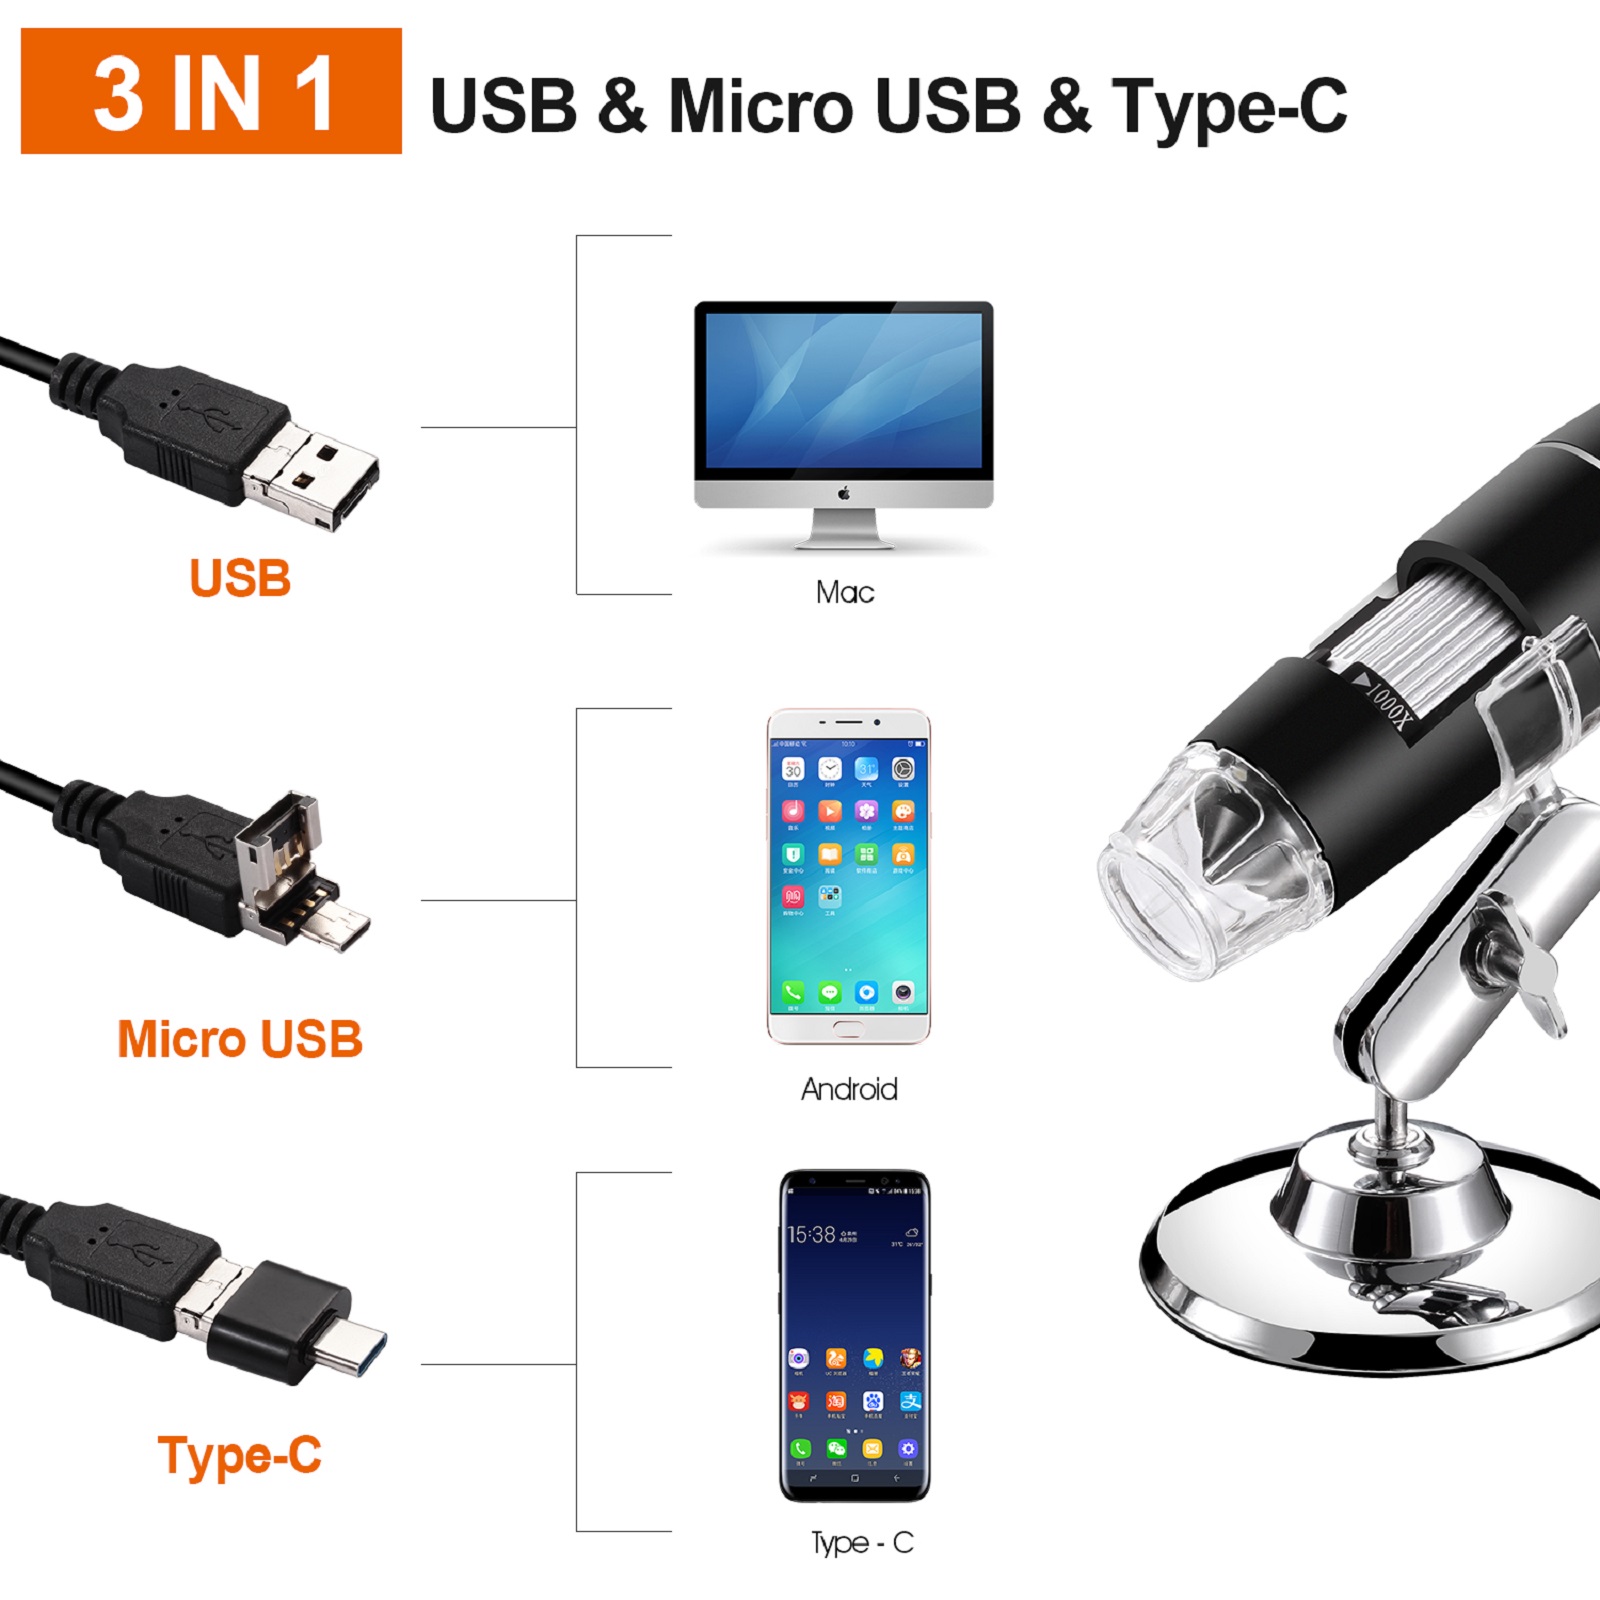 Upgrade 1000x HD USB Microscope with 8 LED Compatible with Mac Window 7 8 10 Android Linux USB Digital Microscope Mini Magnification Endoscope with Type-C OTG Adapter and Metal Stand 